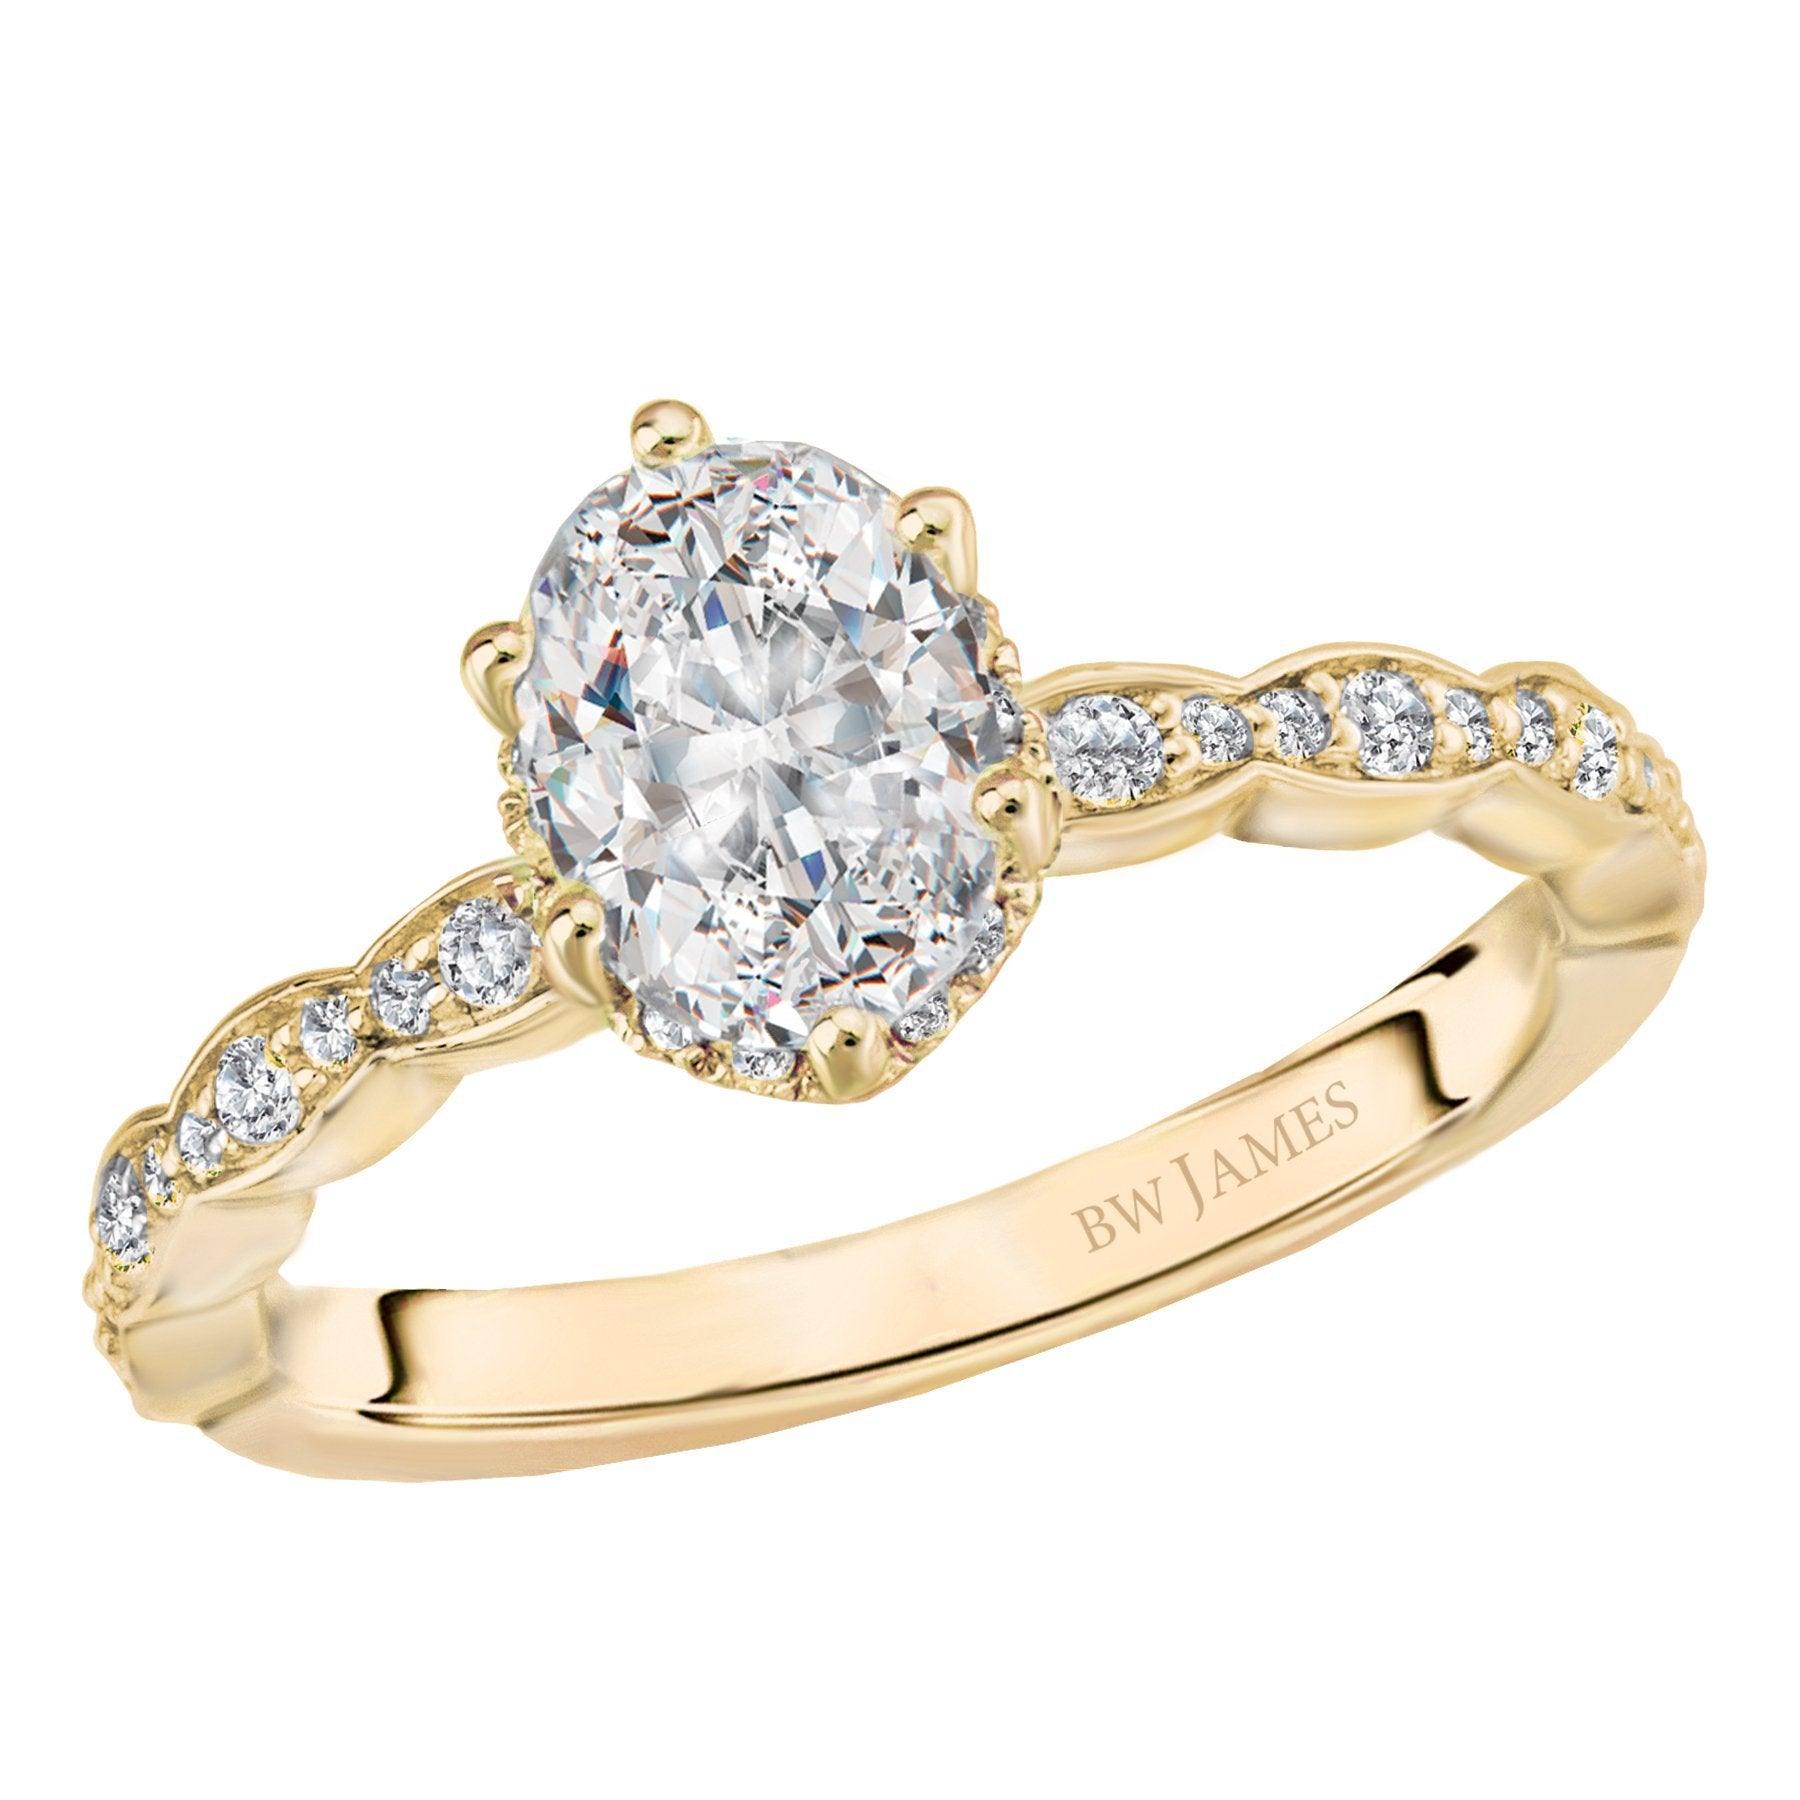 BW JAMES Engagement Rings "The Darby" Halo Semi-Mount Diamond Ring